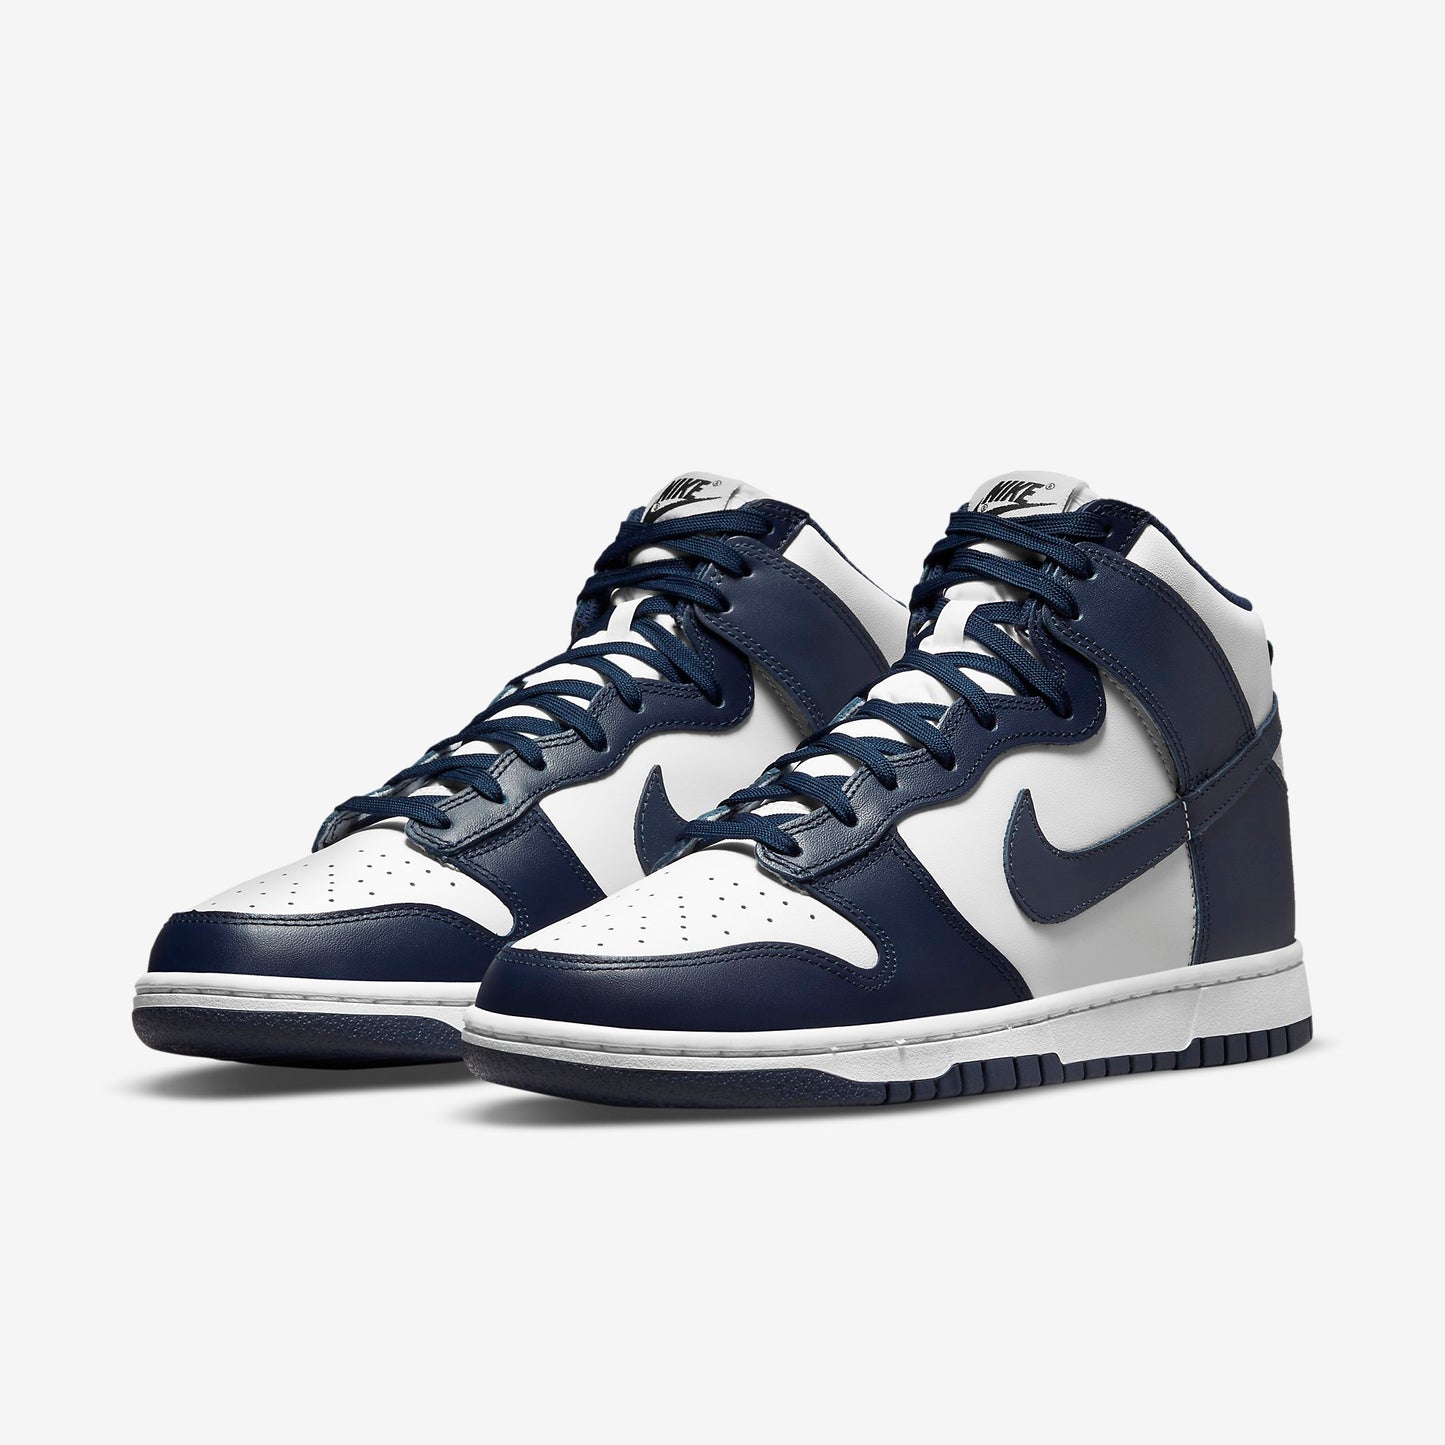 Nike Dunk High Navy - Lit Fitters Portugal